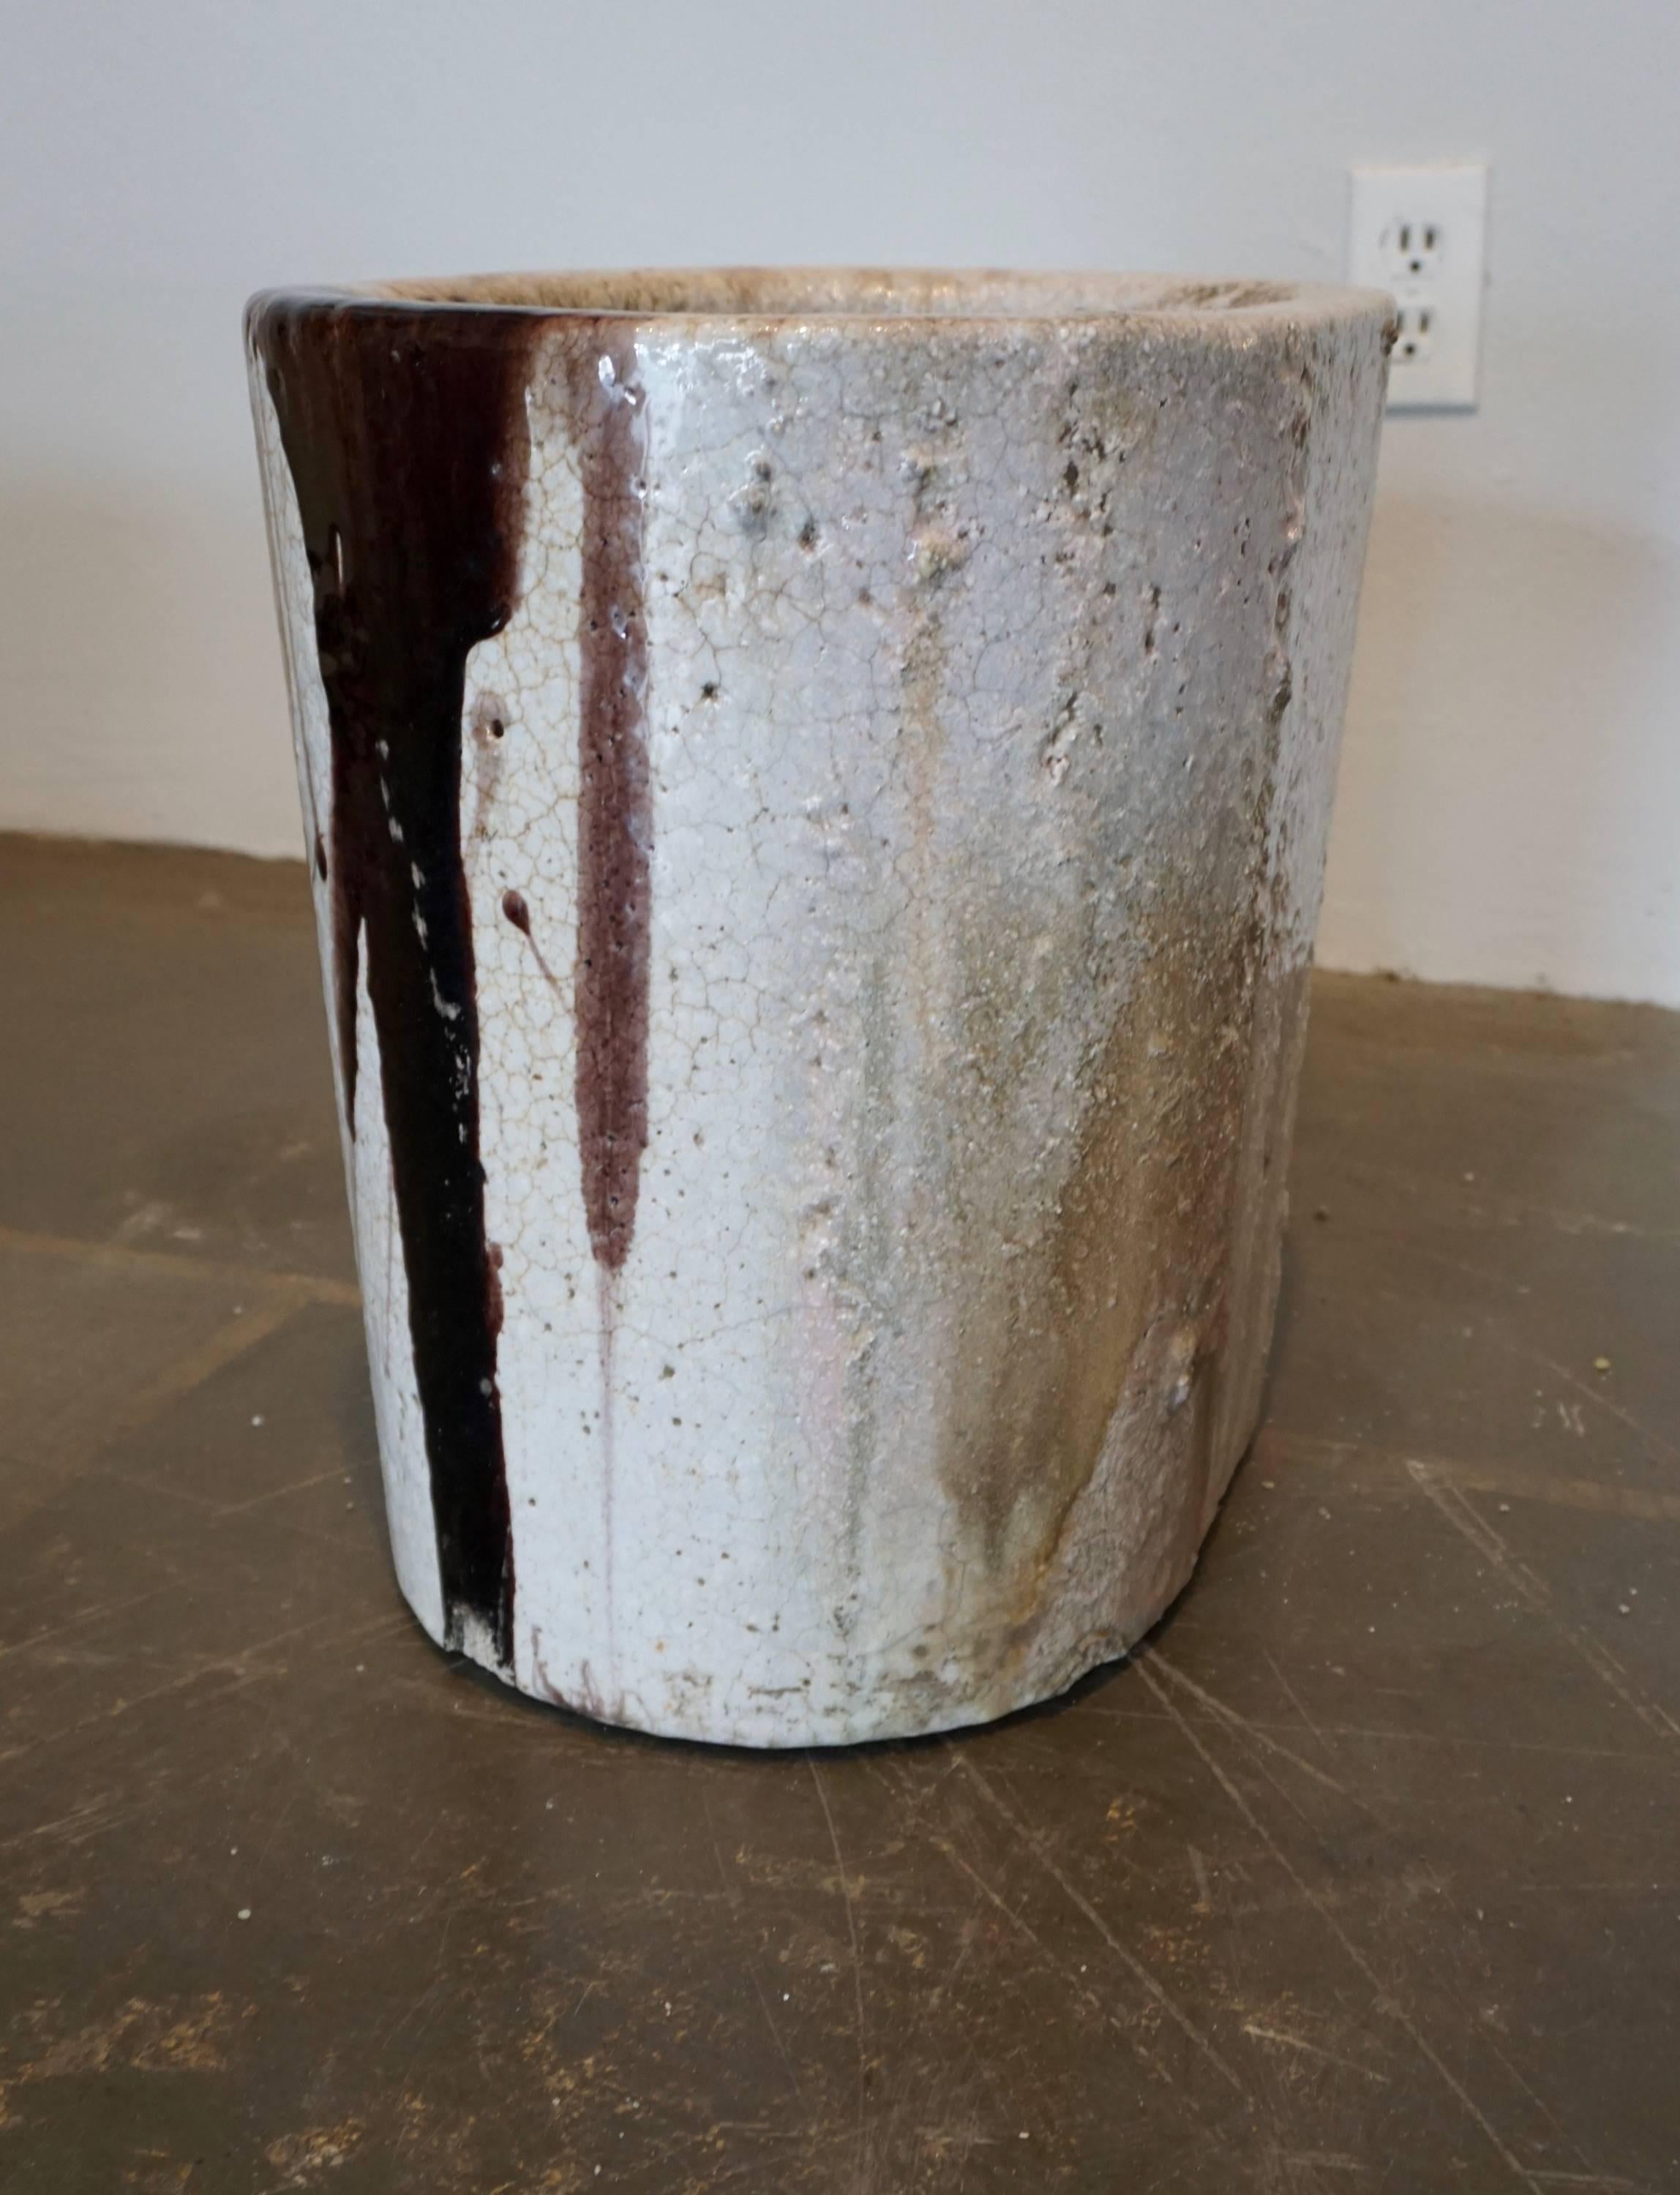 Ceramic vessel used to melt glass at very high temperatures. Enhanced by the crackling and the glass remnants and drippings. Can be used as a planter or decorative object, indoors or outdoors.